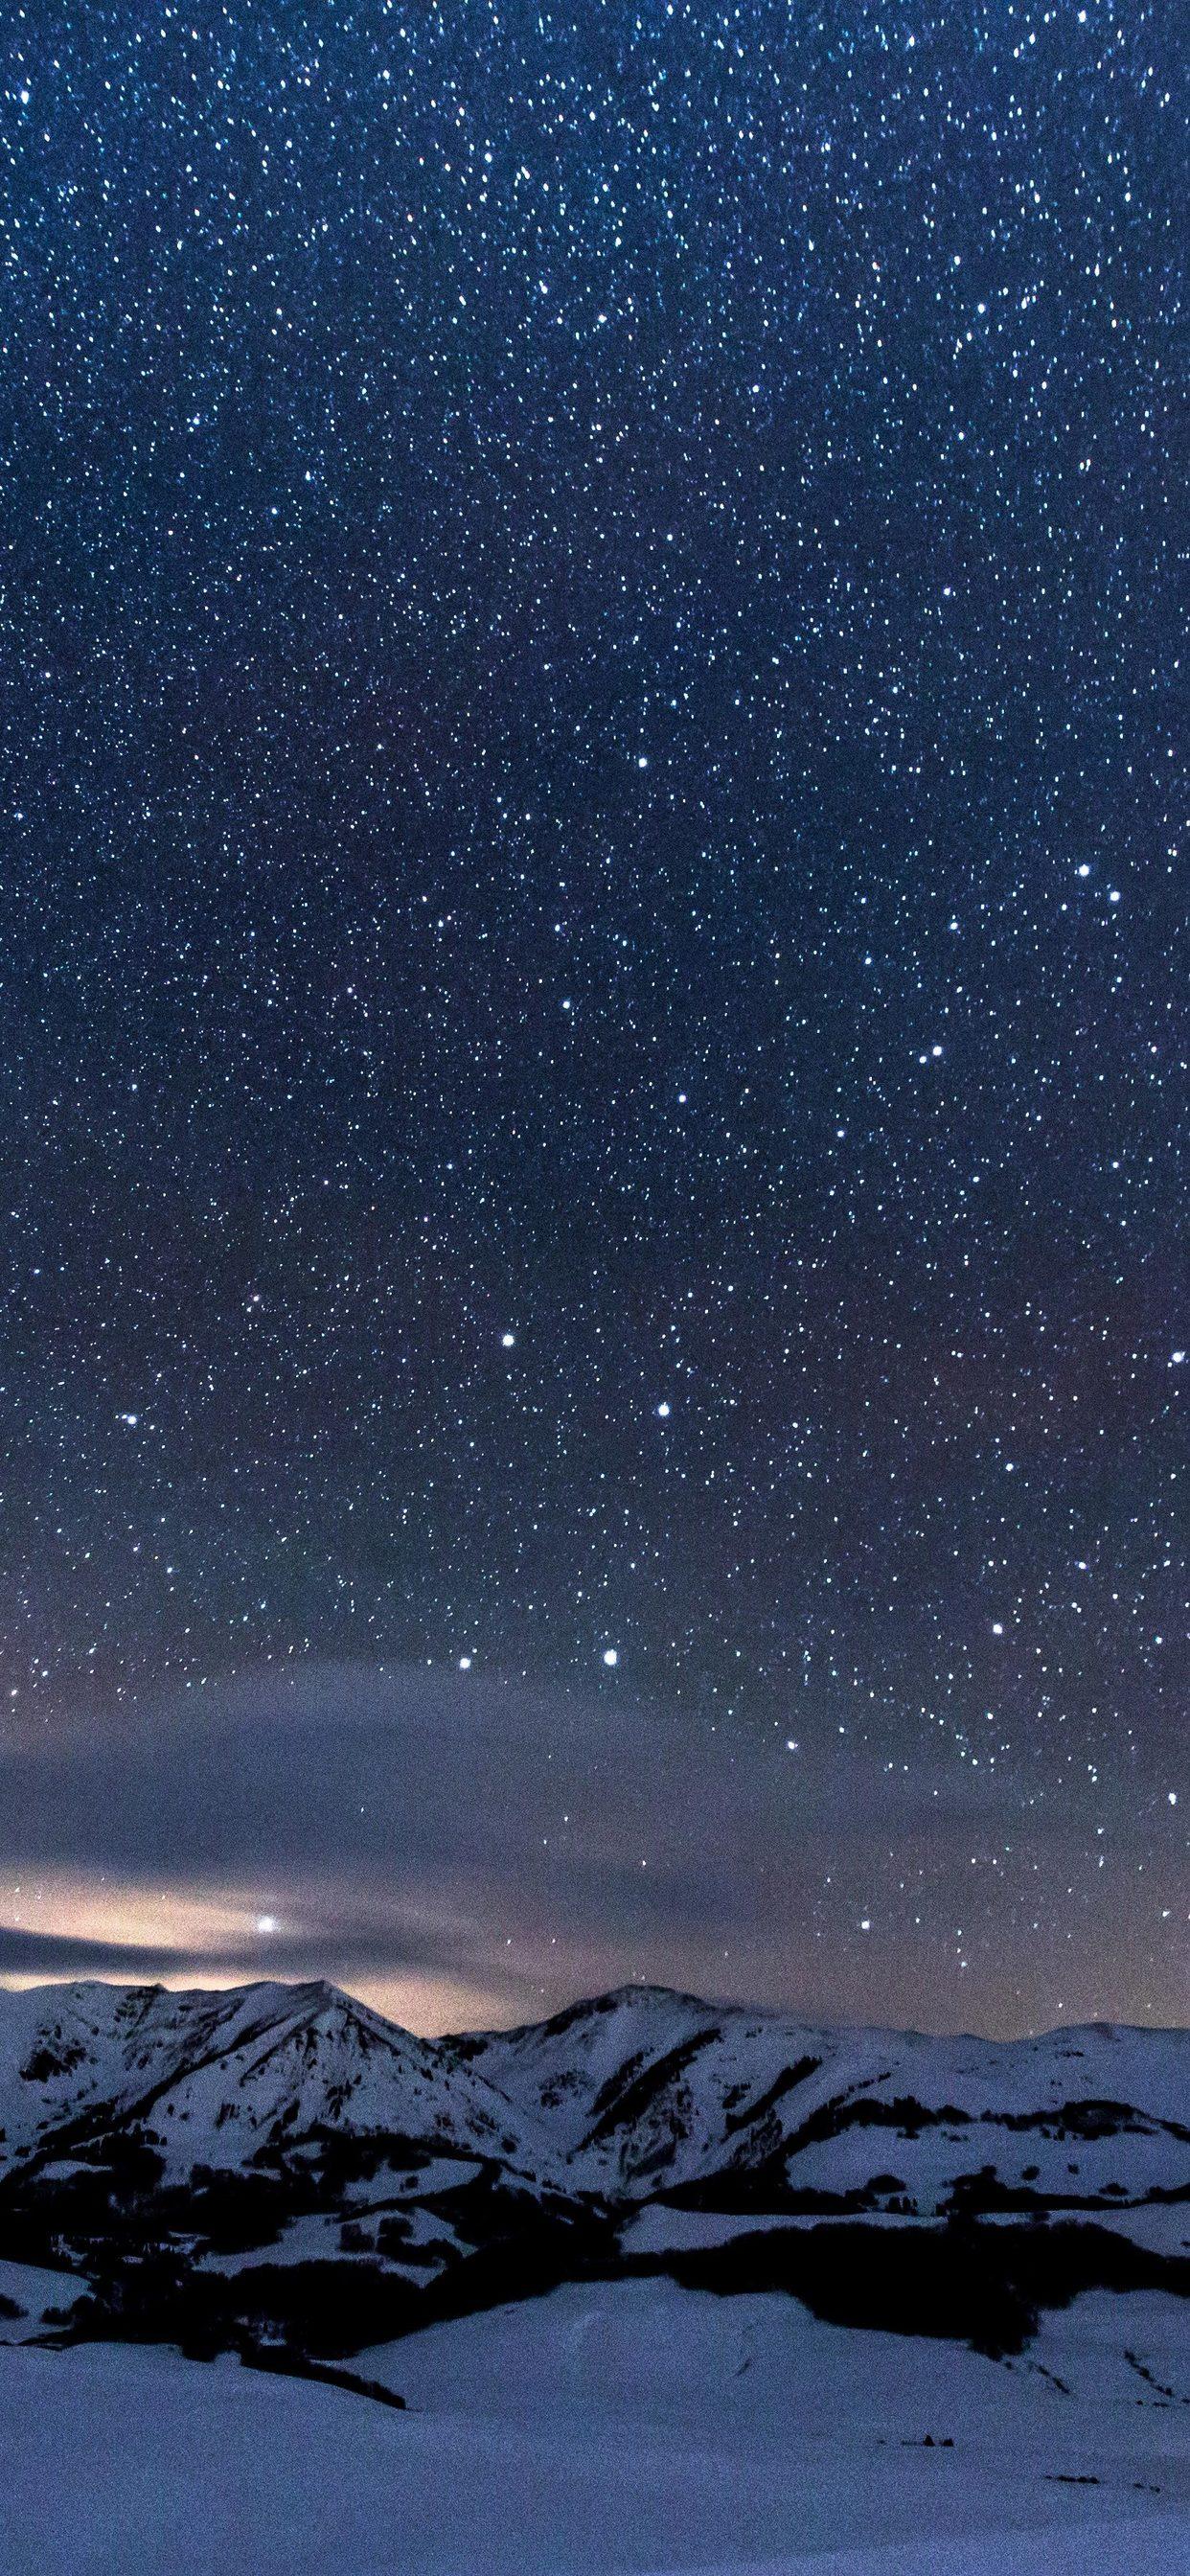 1242x2688 Sky Full Of Stars Snowy Mountains 5k Iphone XS MAX